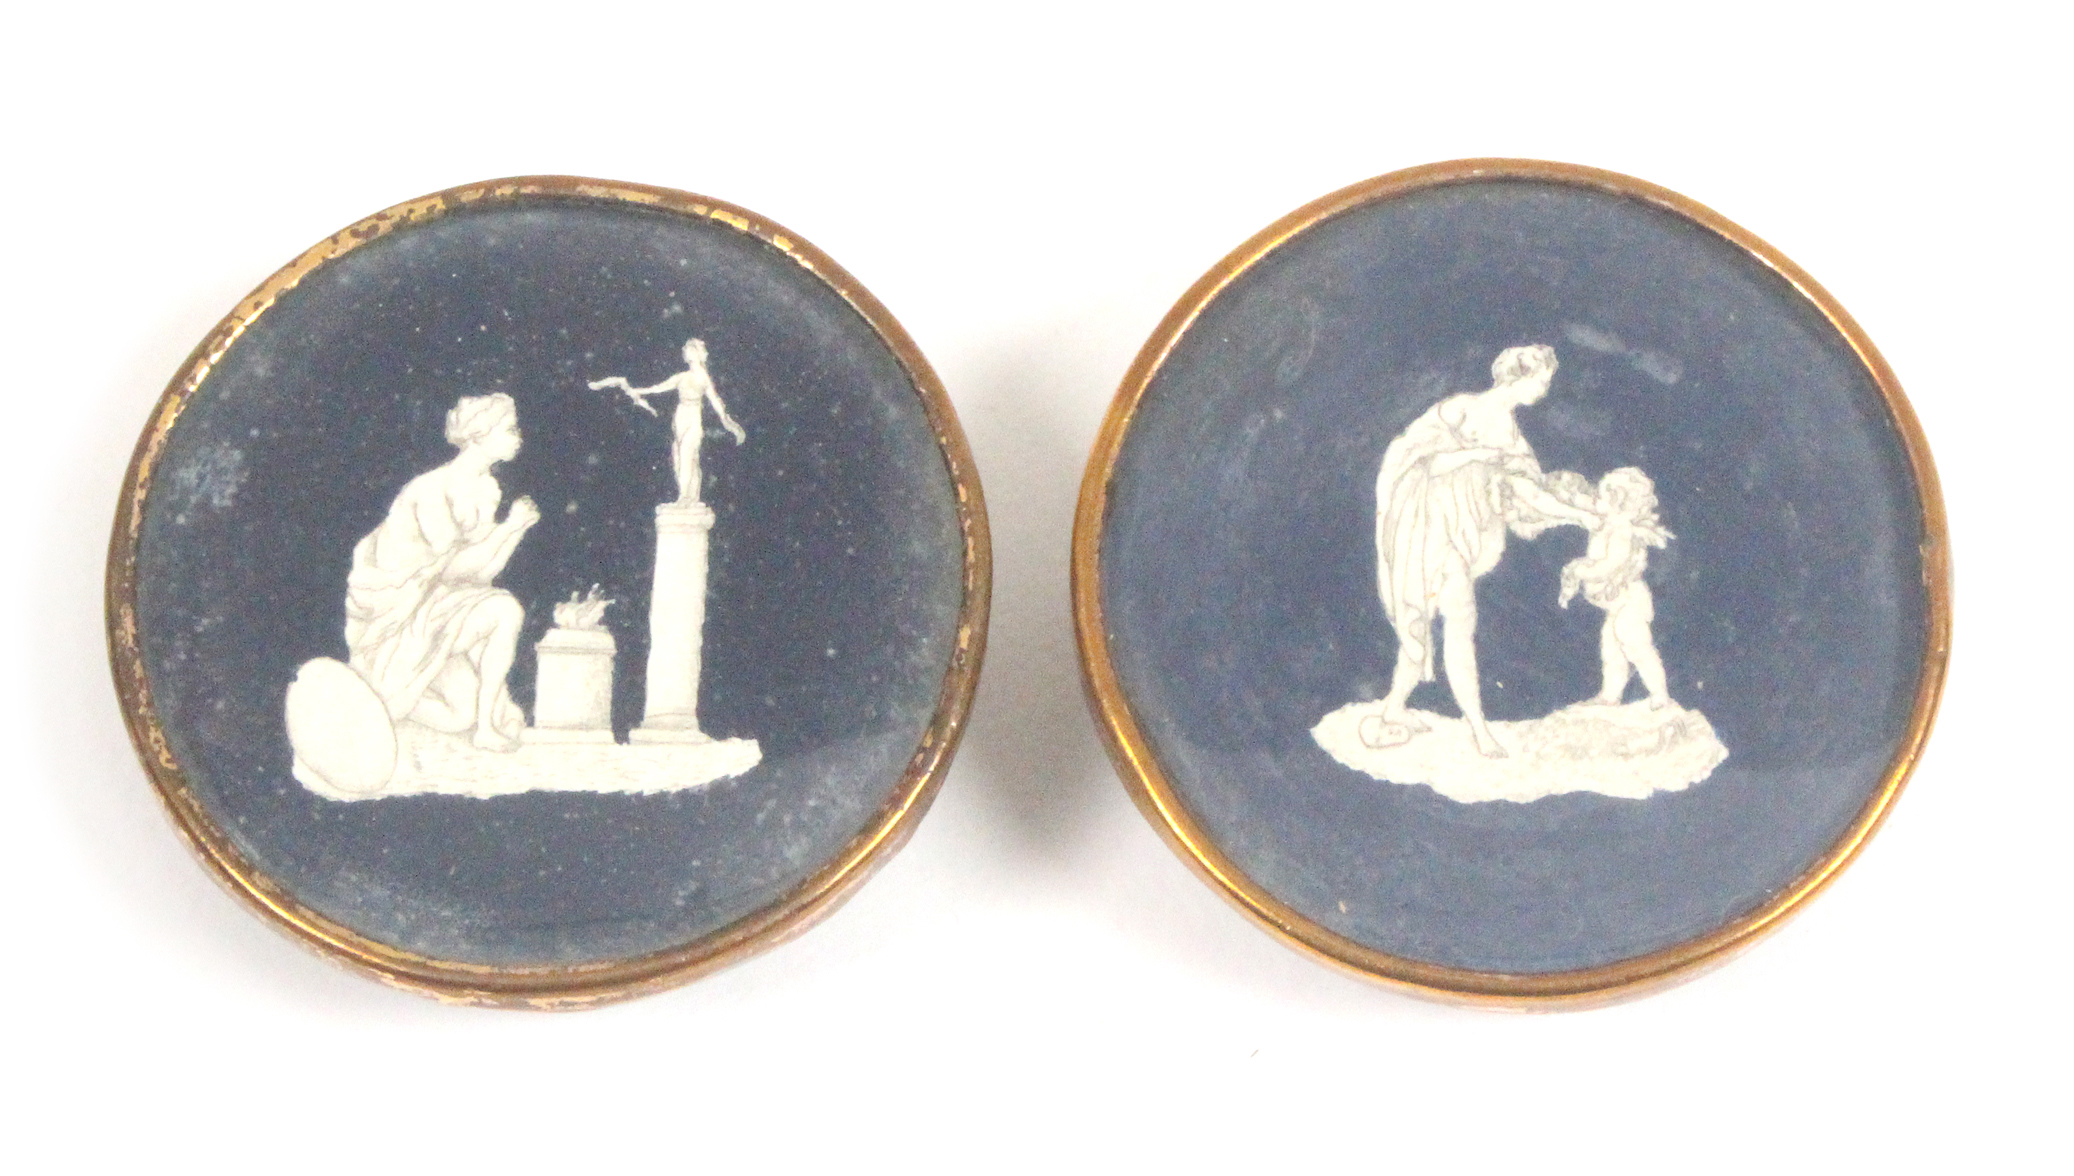 Buttons - a pair of 18th Century buttons, each painted in black on white with a classical style